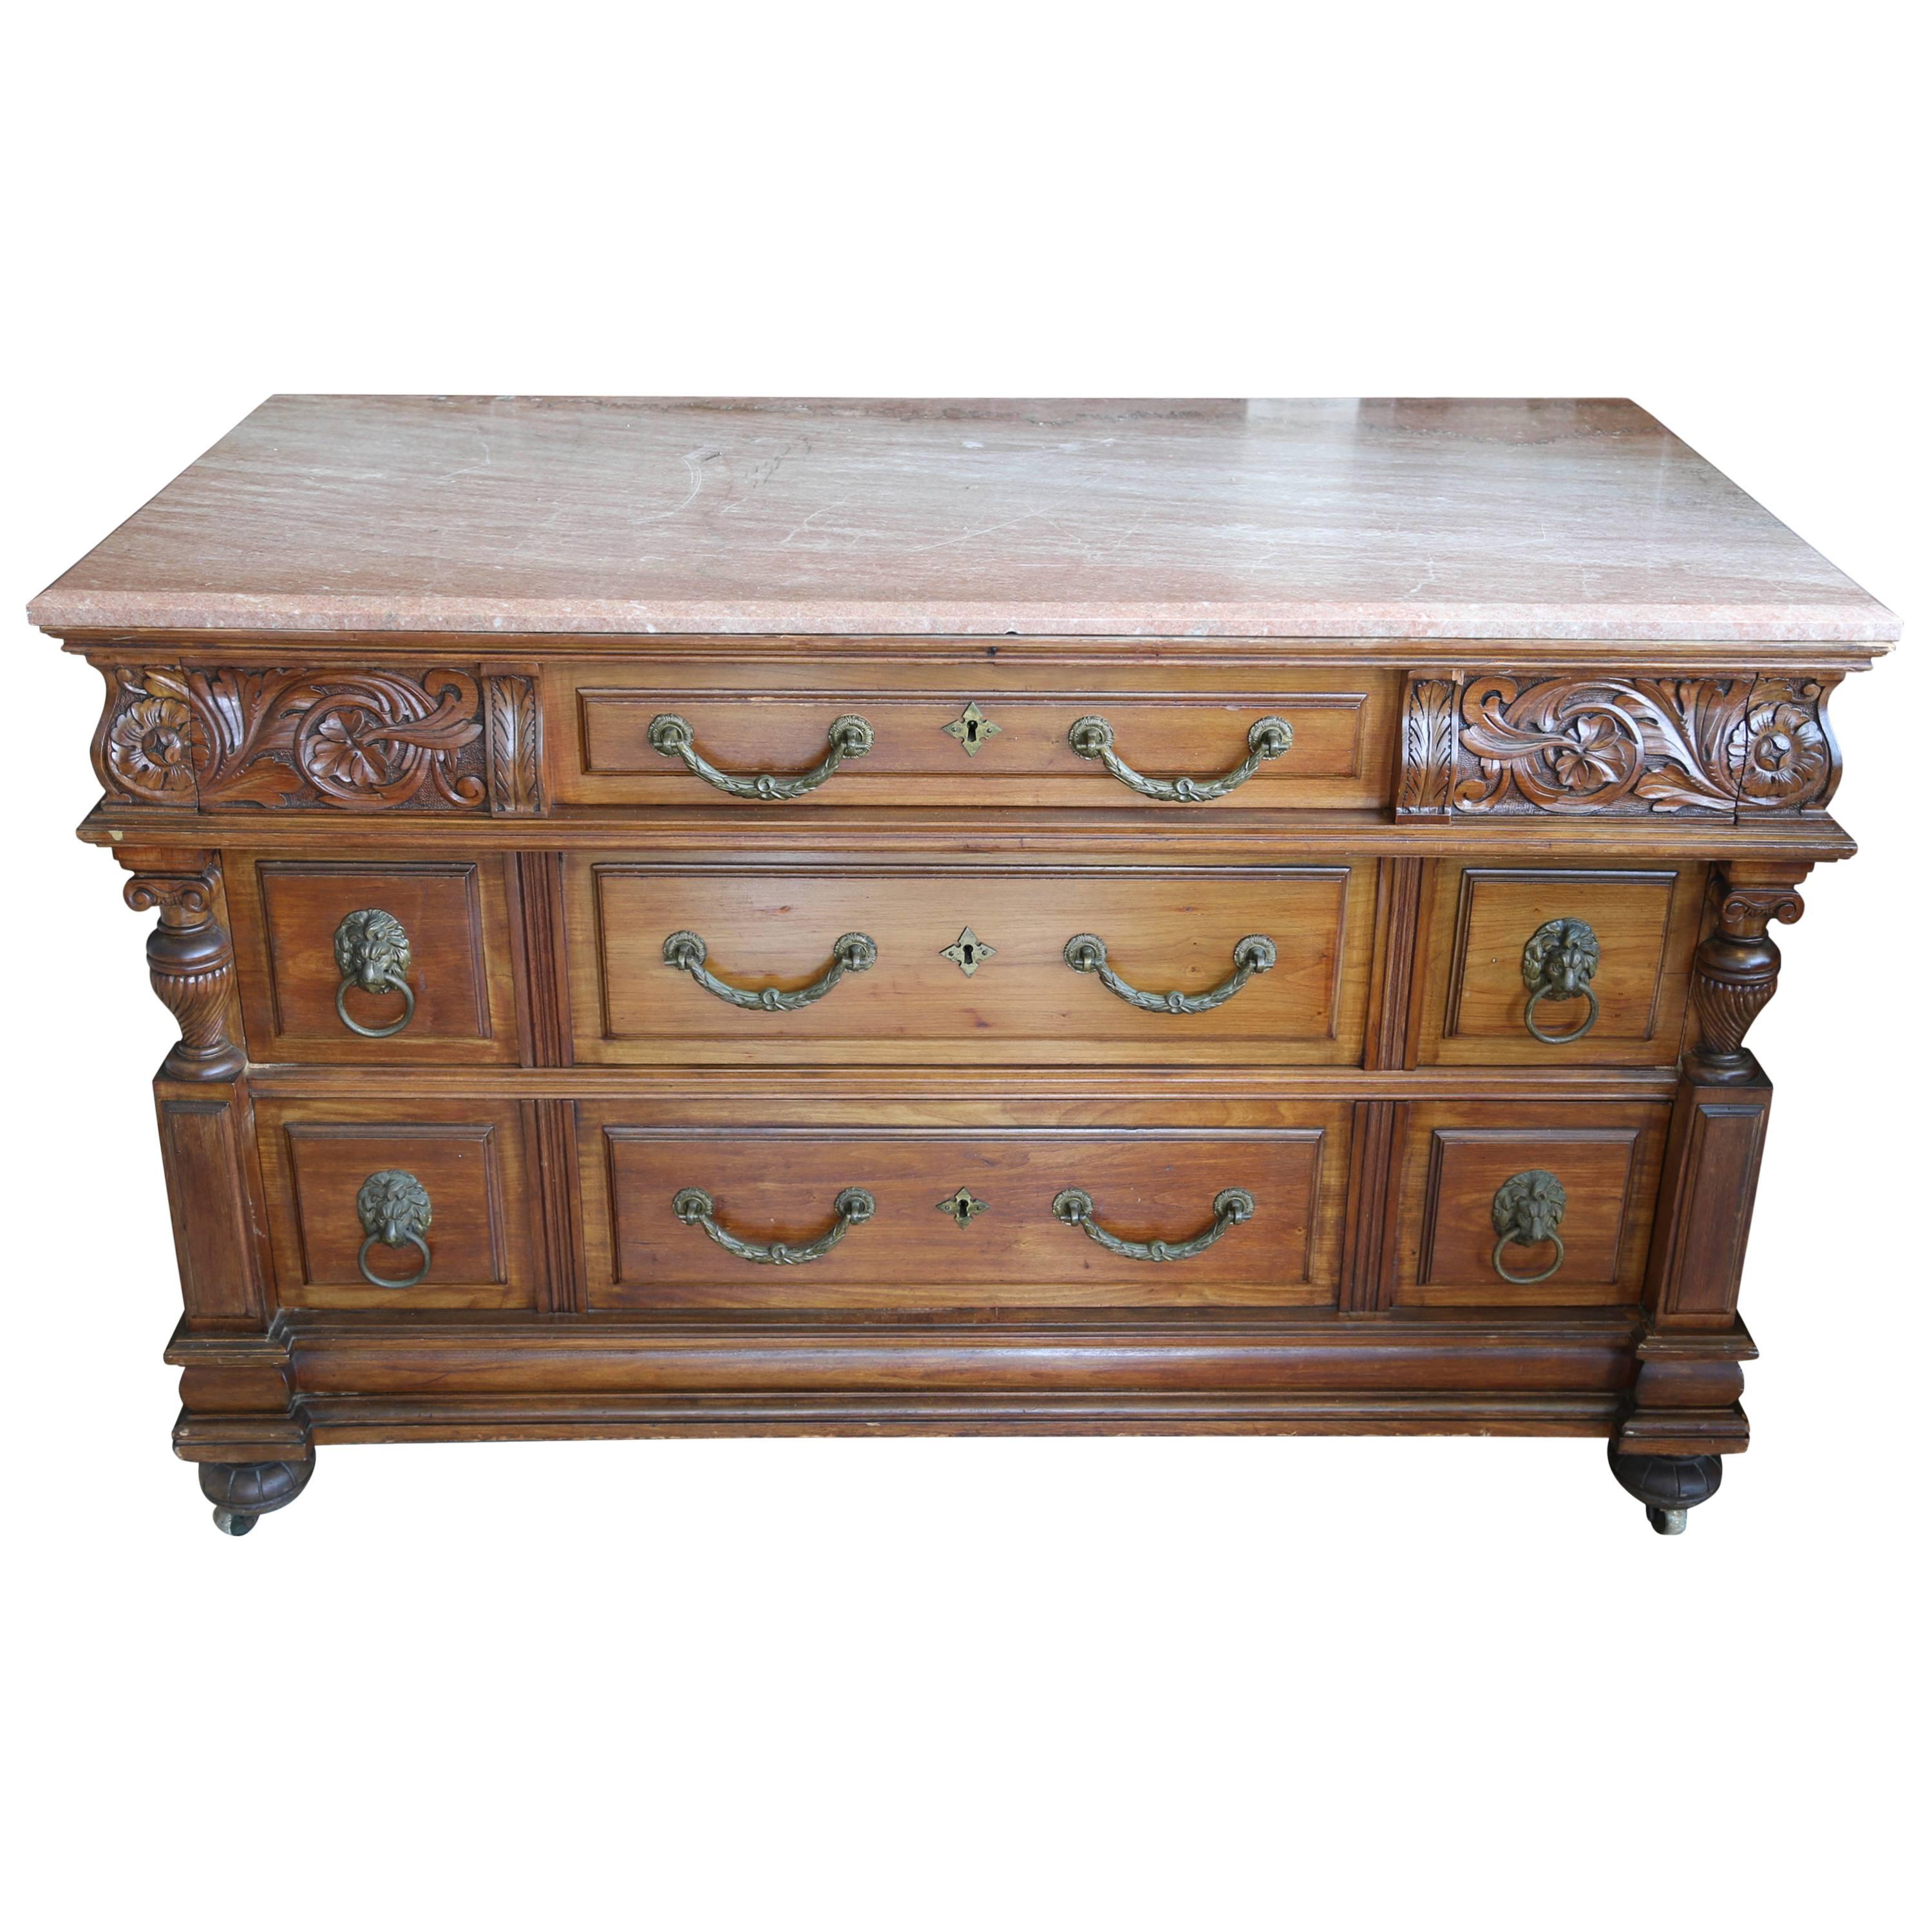 Superb 19th Century English  Revival Marble-Top Chest of Drawers in Walnut